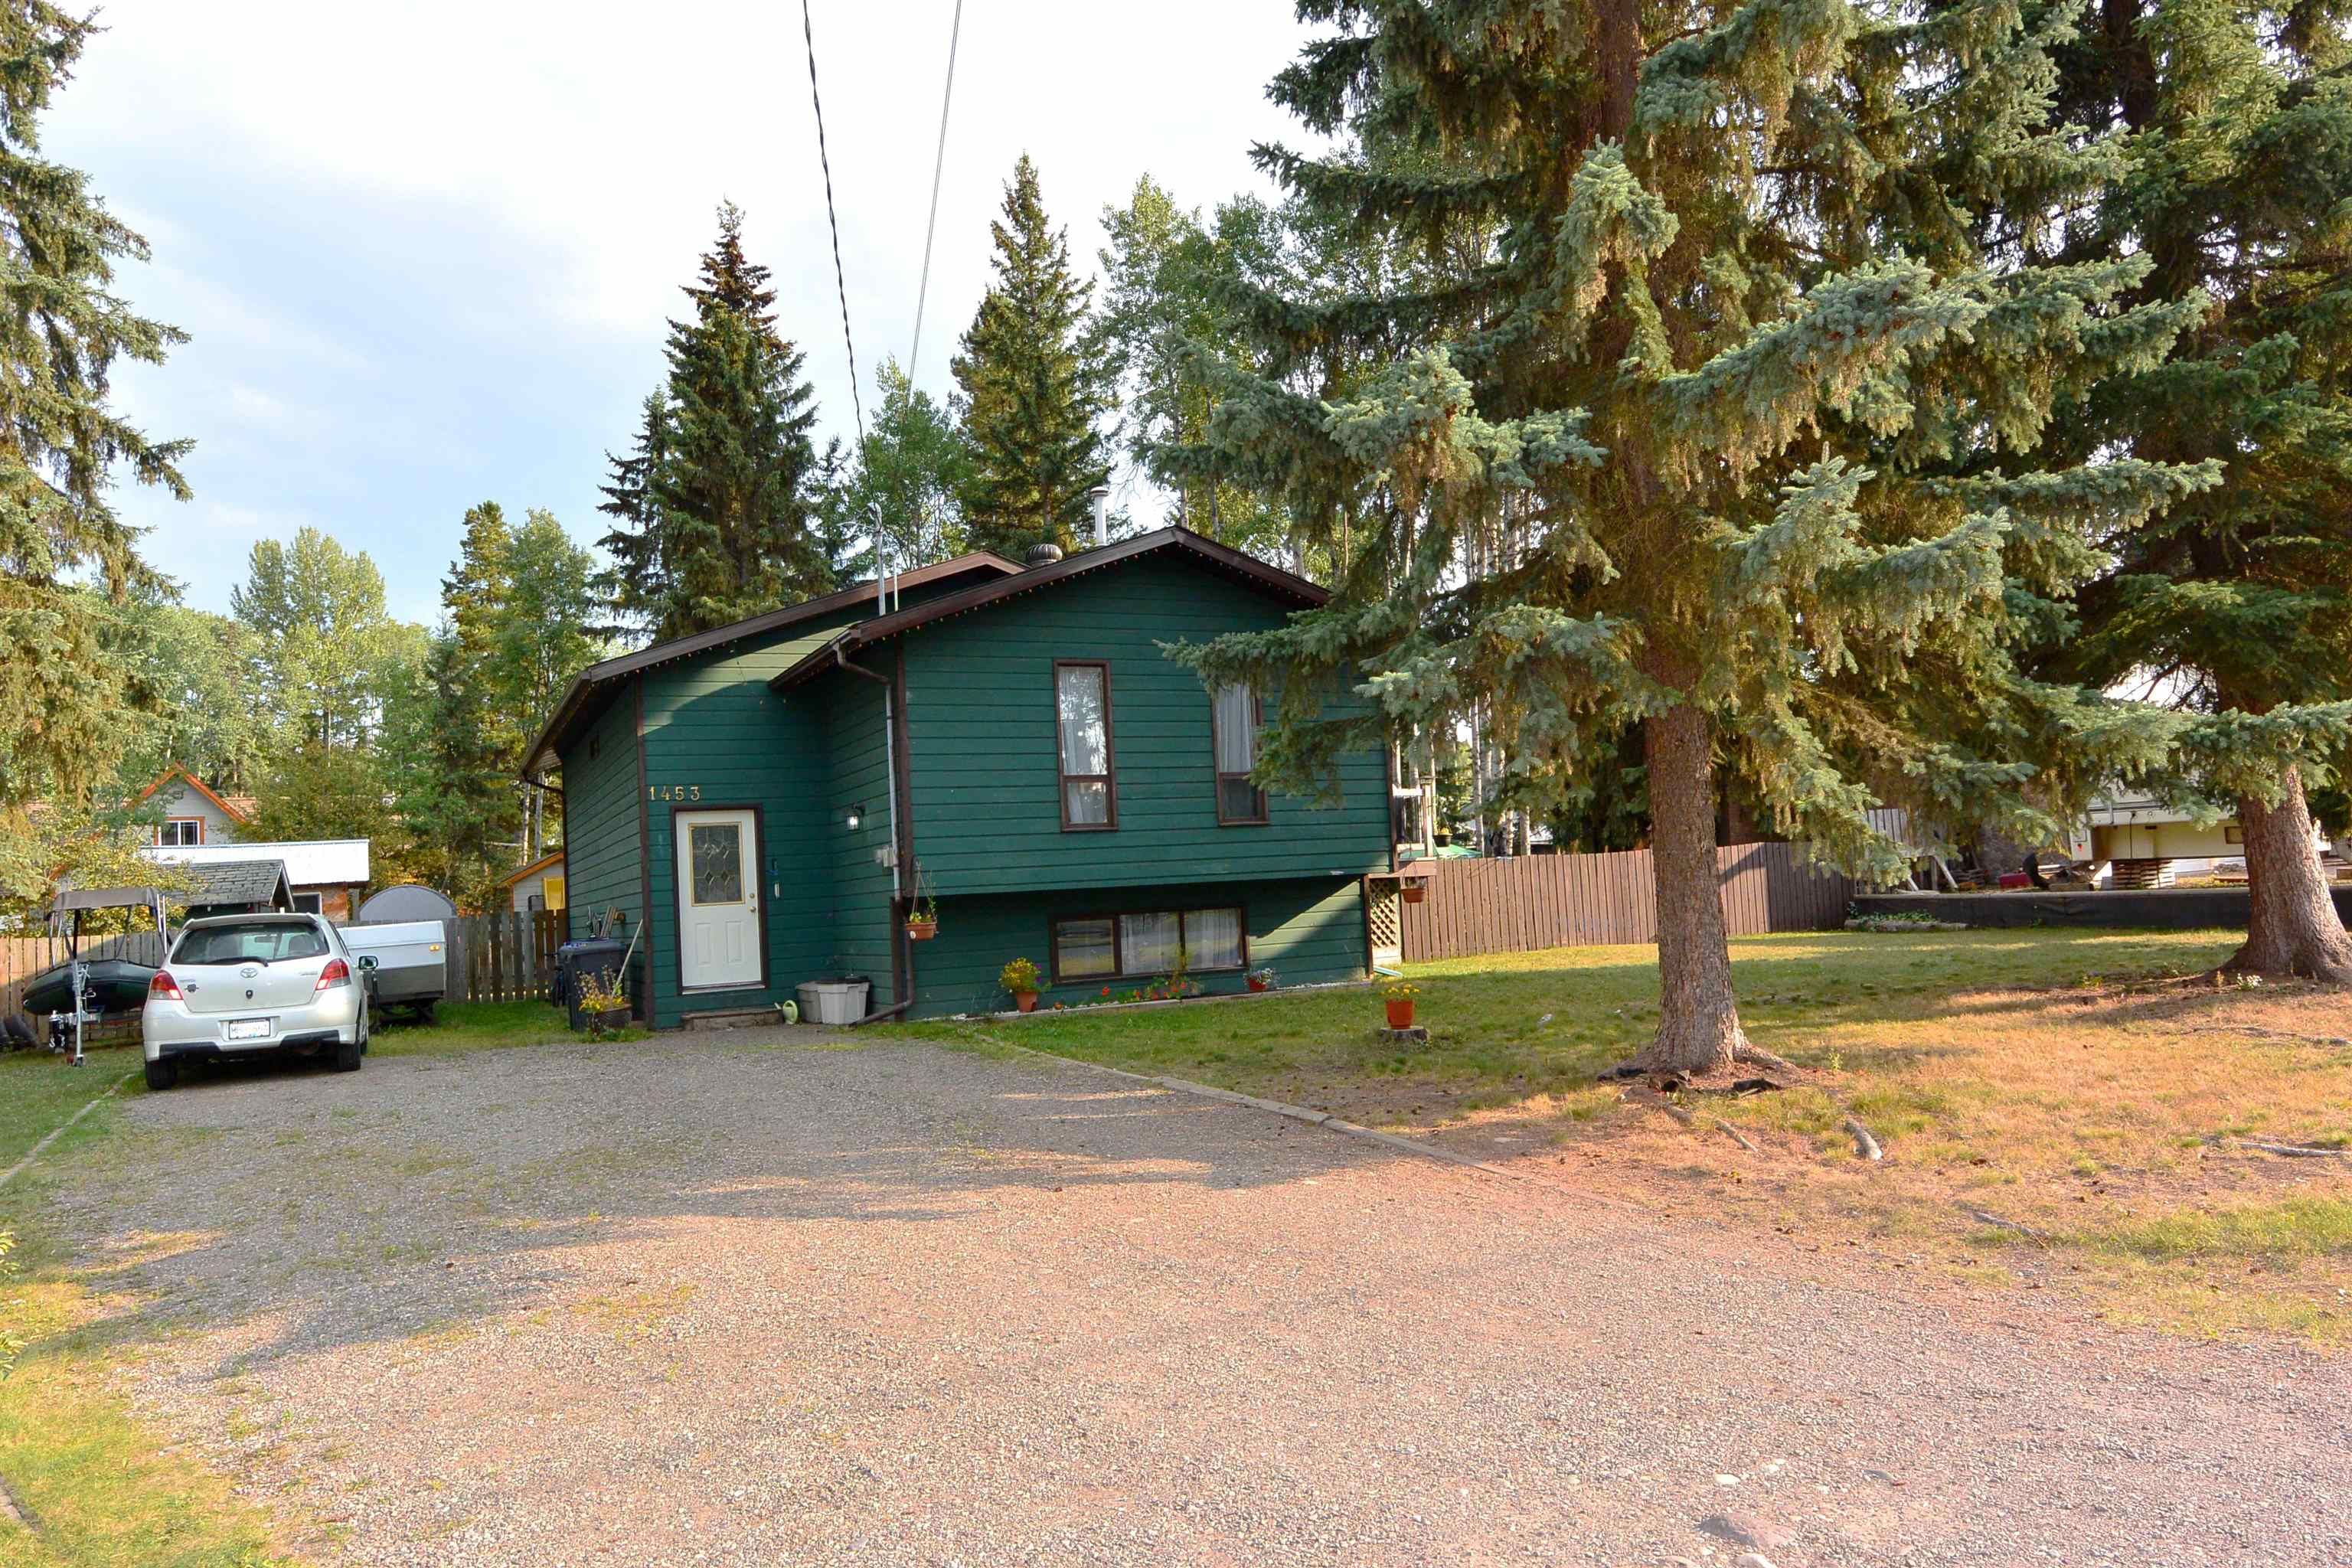 Mark this property at 1453 WALNUT ST in TELKWA SOLD!